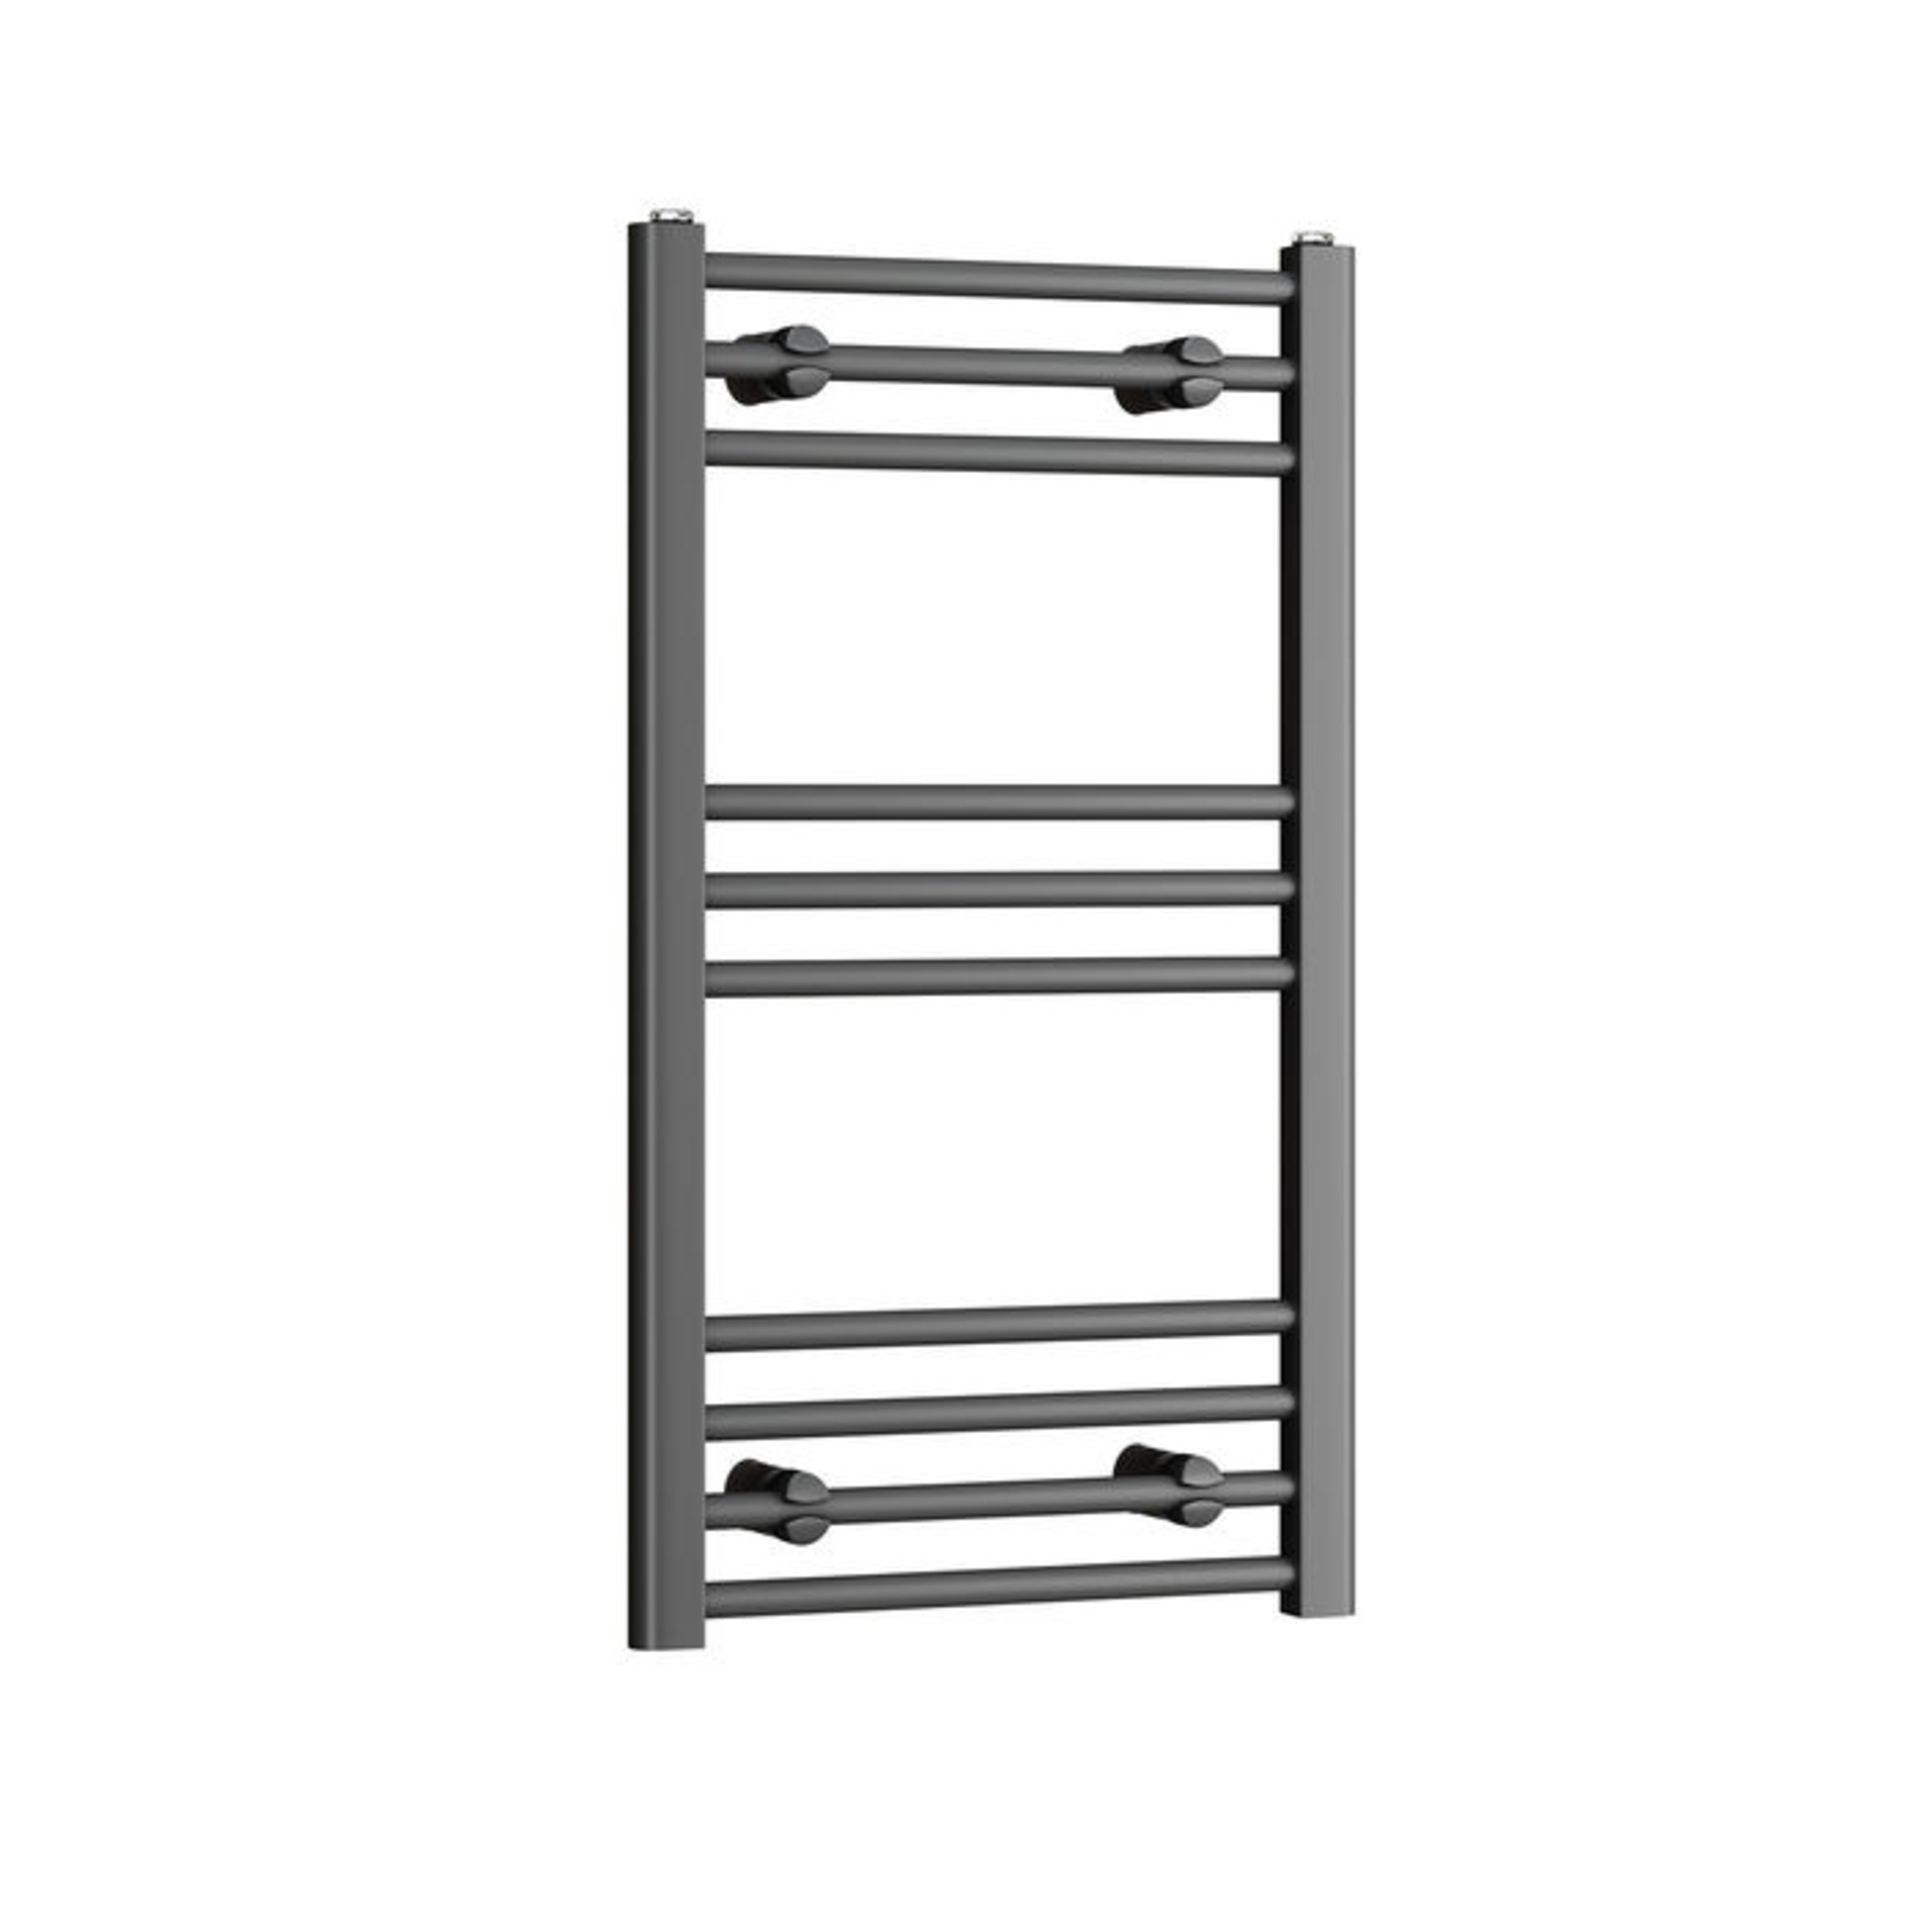 (TA261) 800x450mm - 20mm Tubes - Anthracite Heated Straight Rail Ladder Towel Radiator. Corrosion - Image 3 of 3